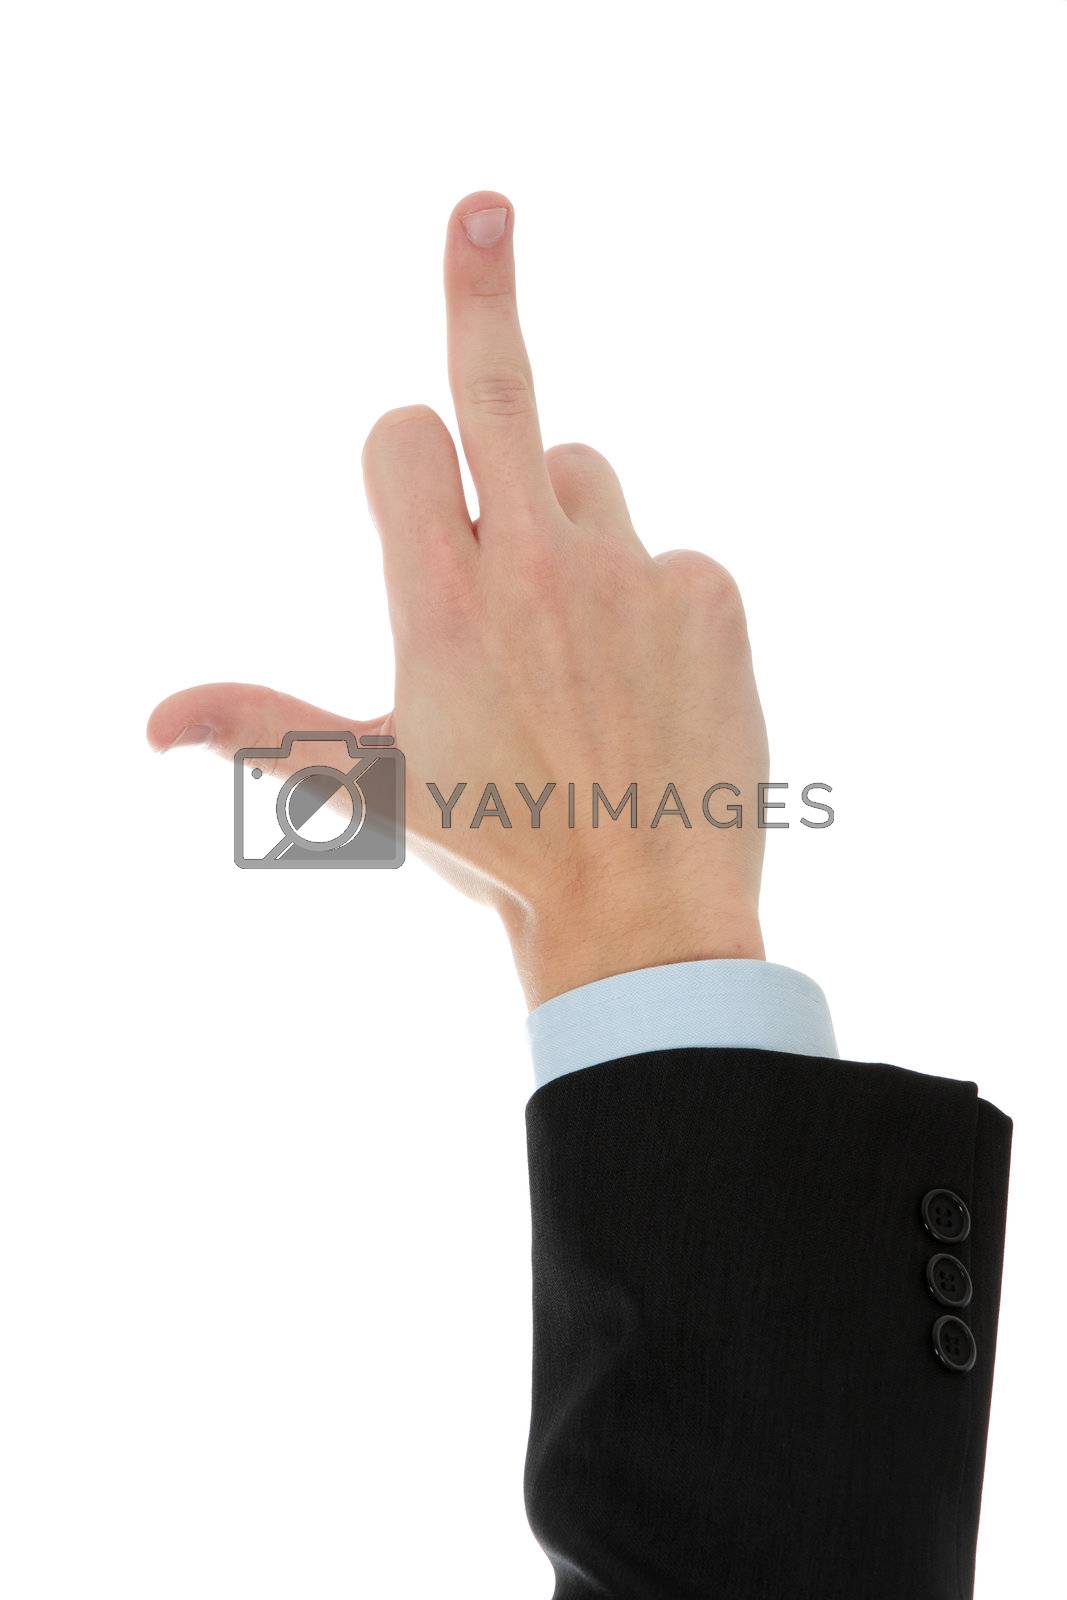 Royalty free image of Gesturing hand by BDS